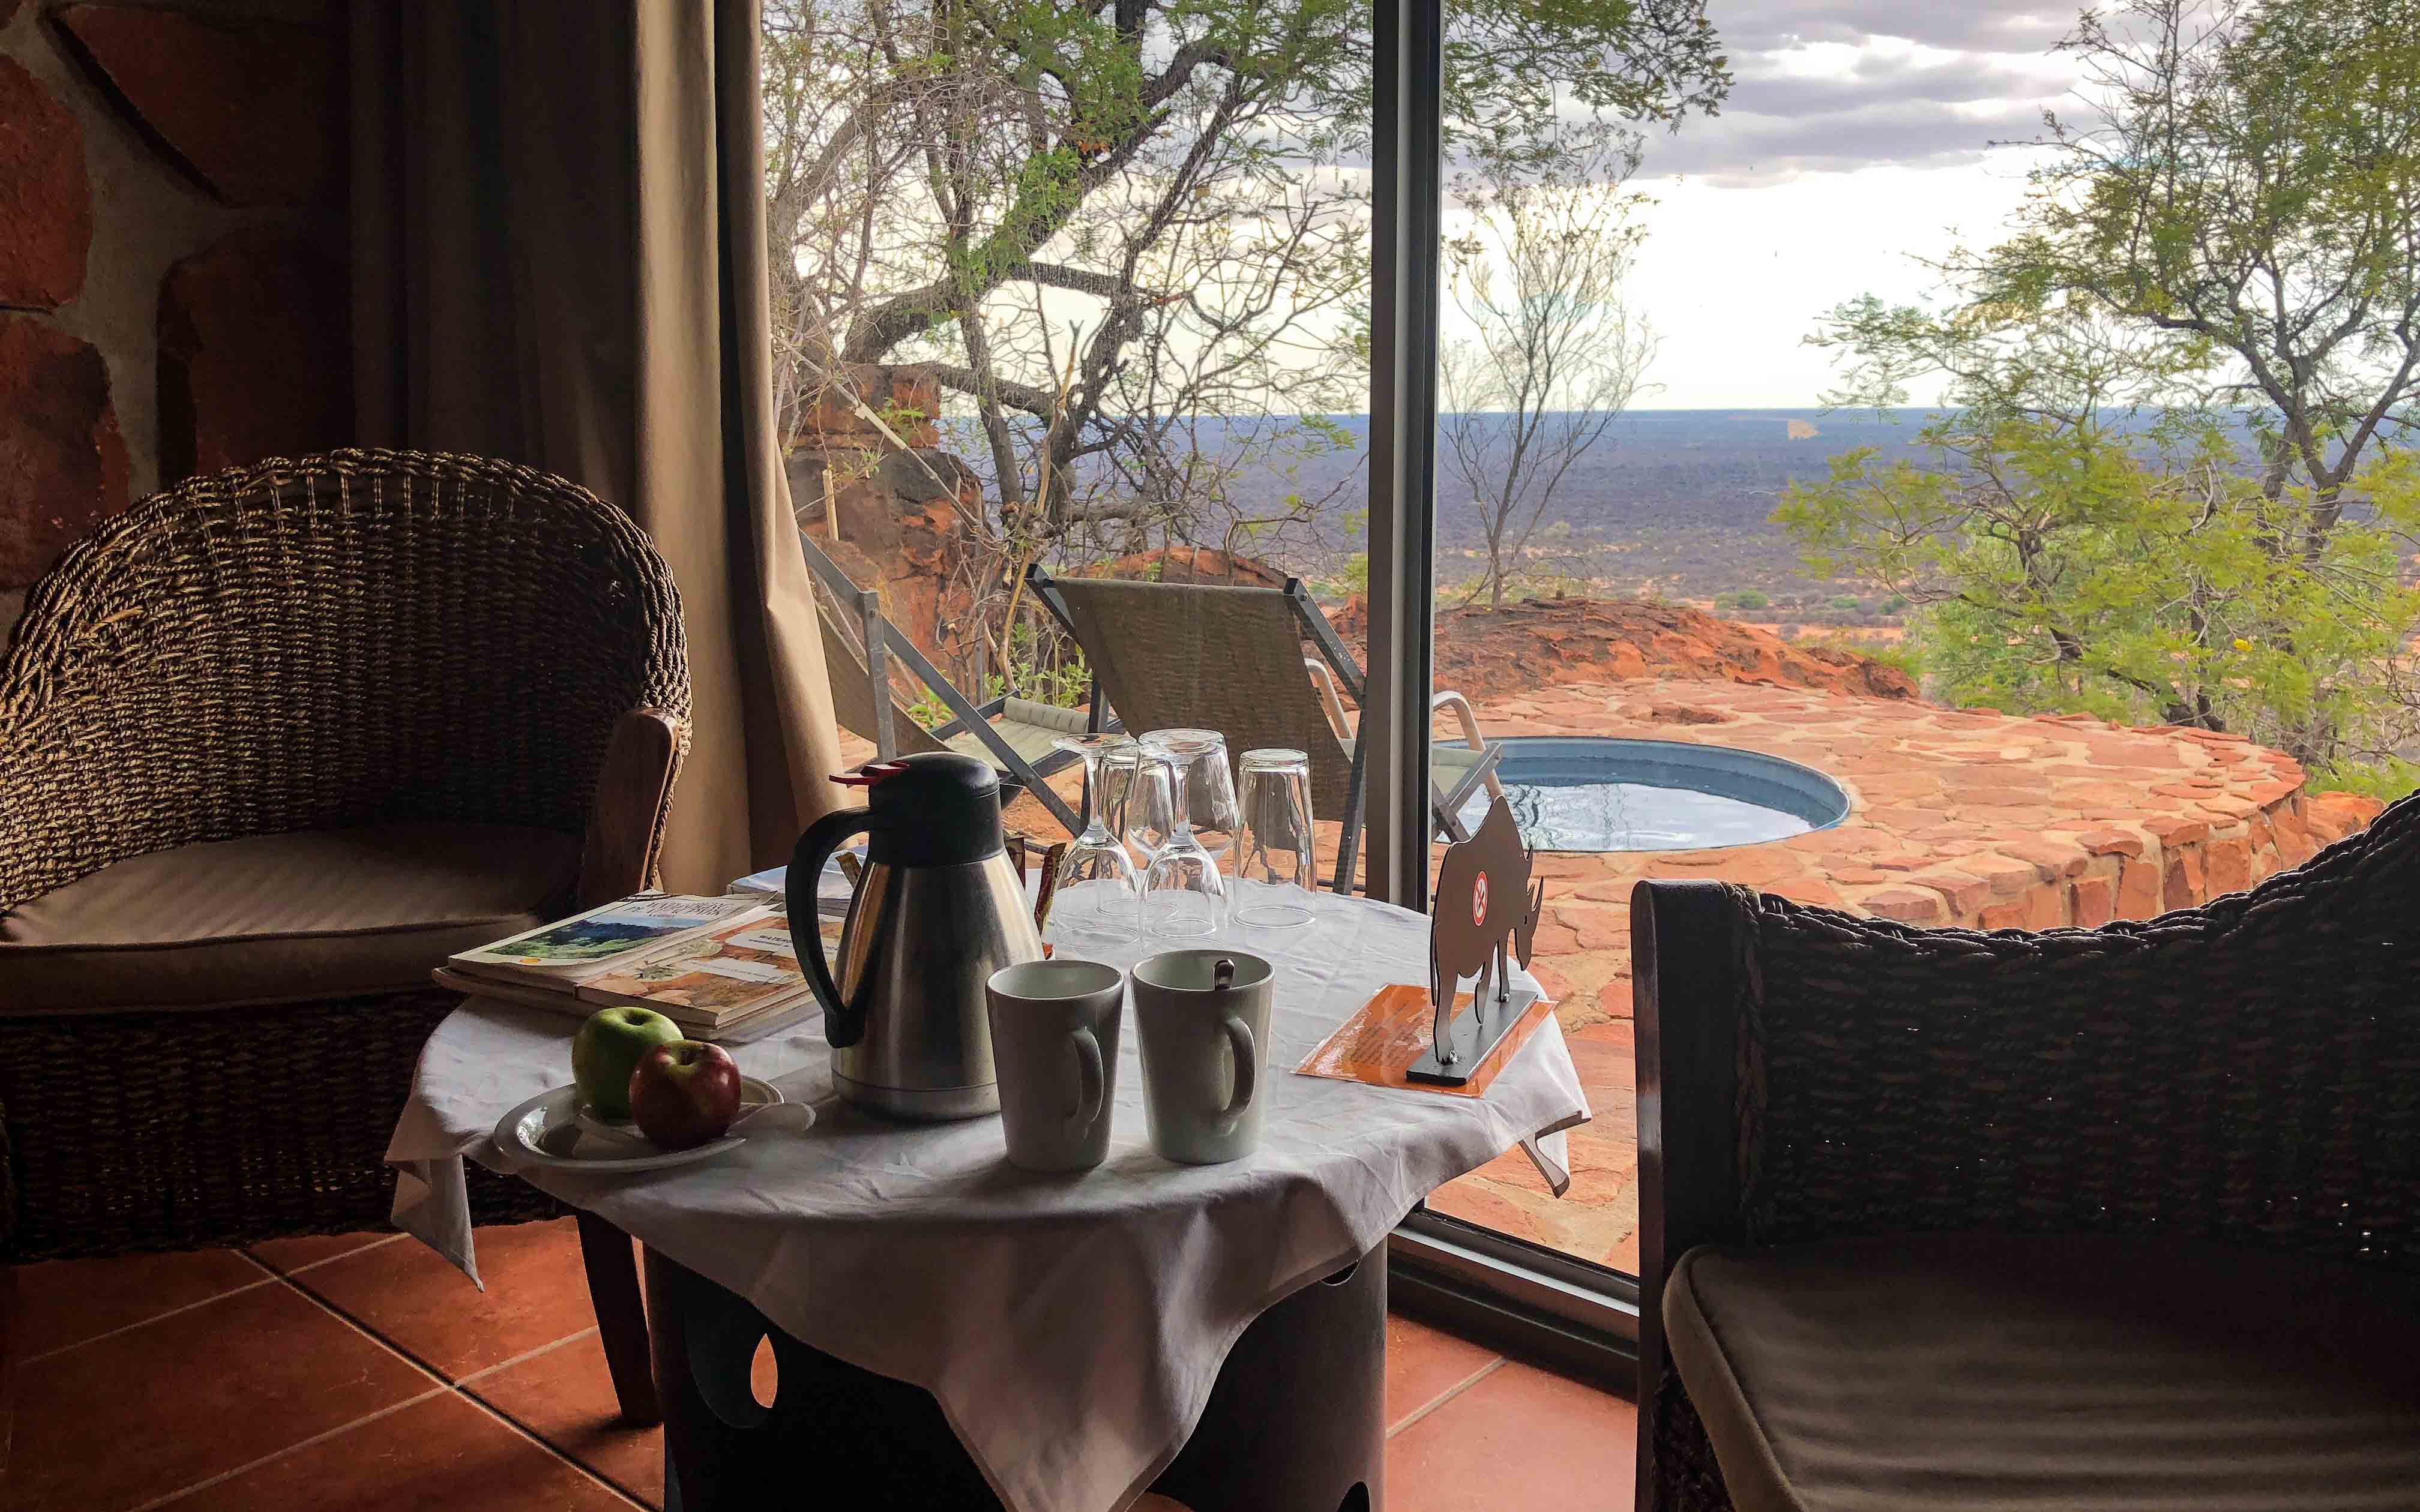 Waterberg Plateau from Room